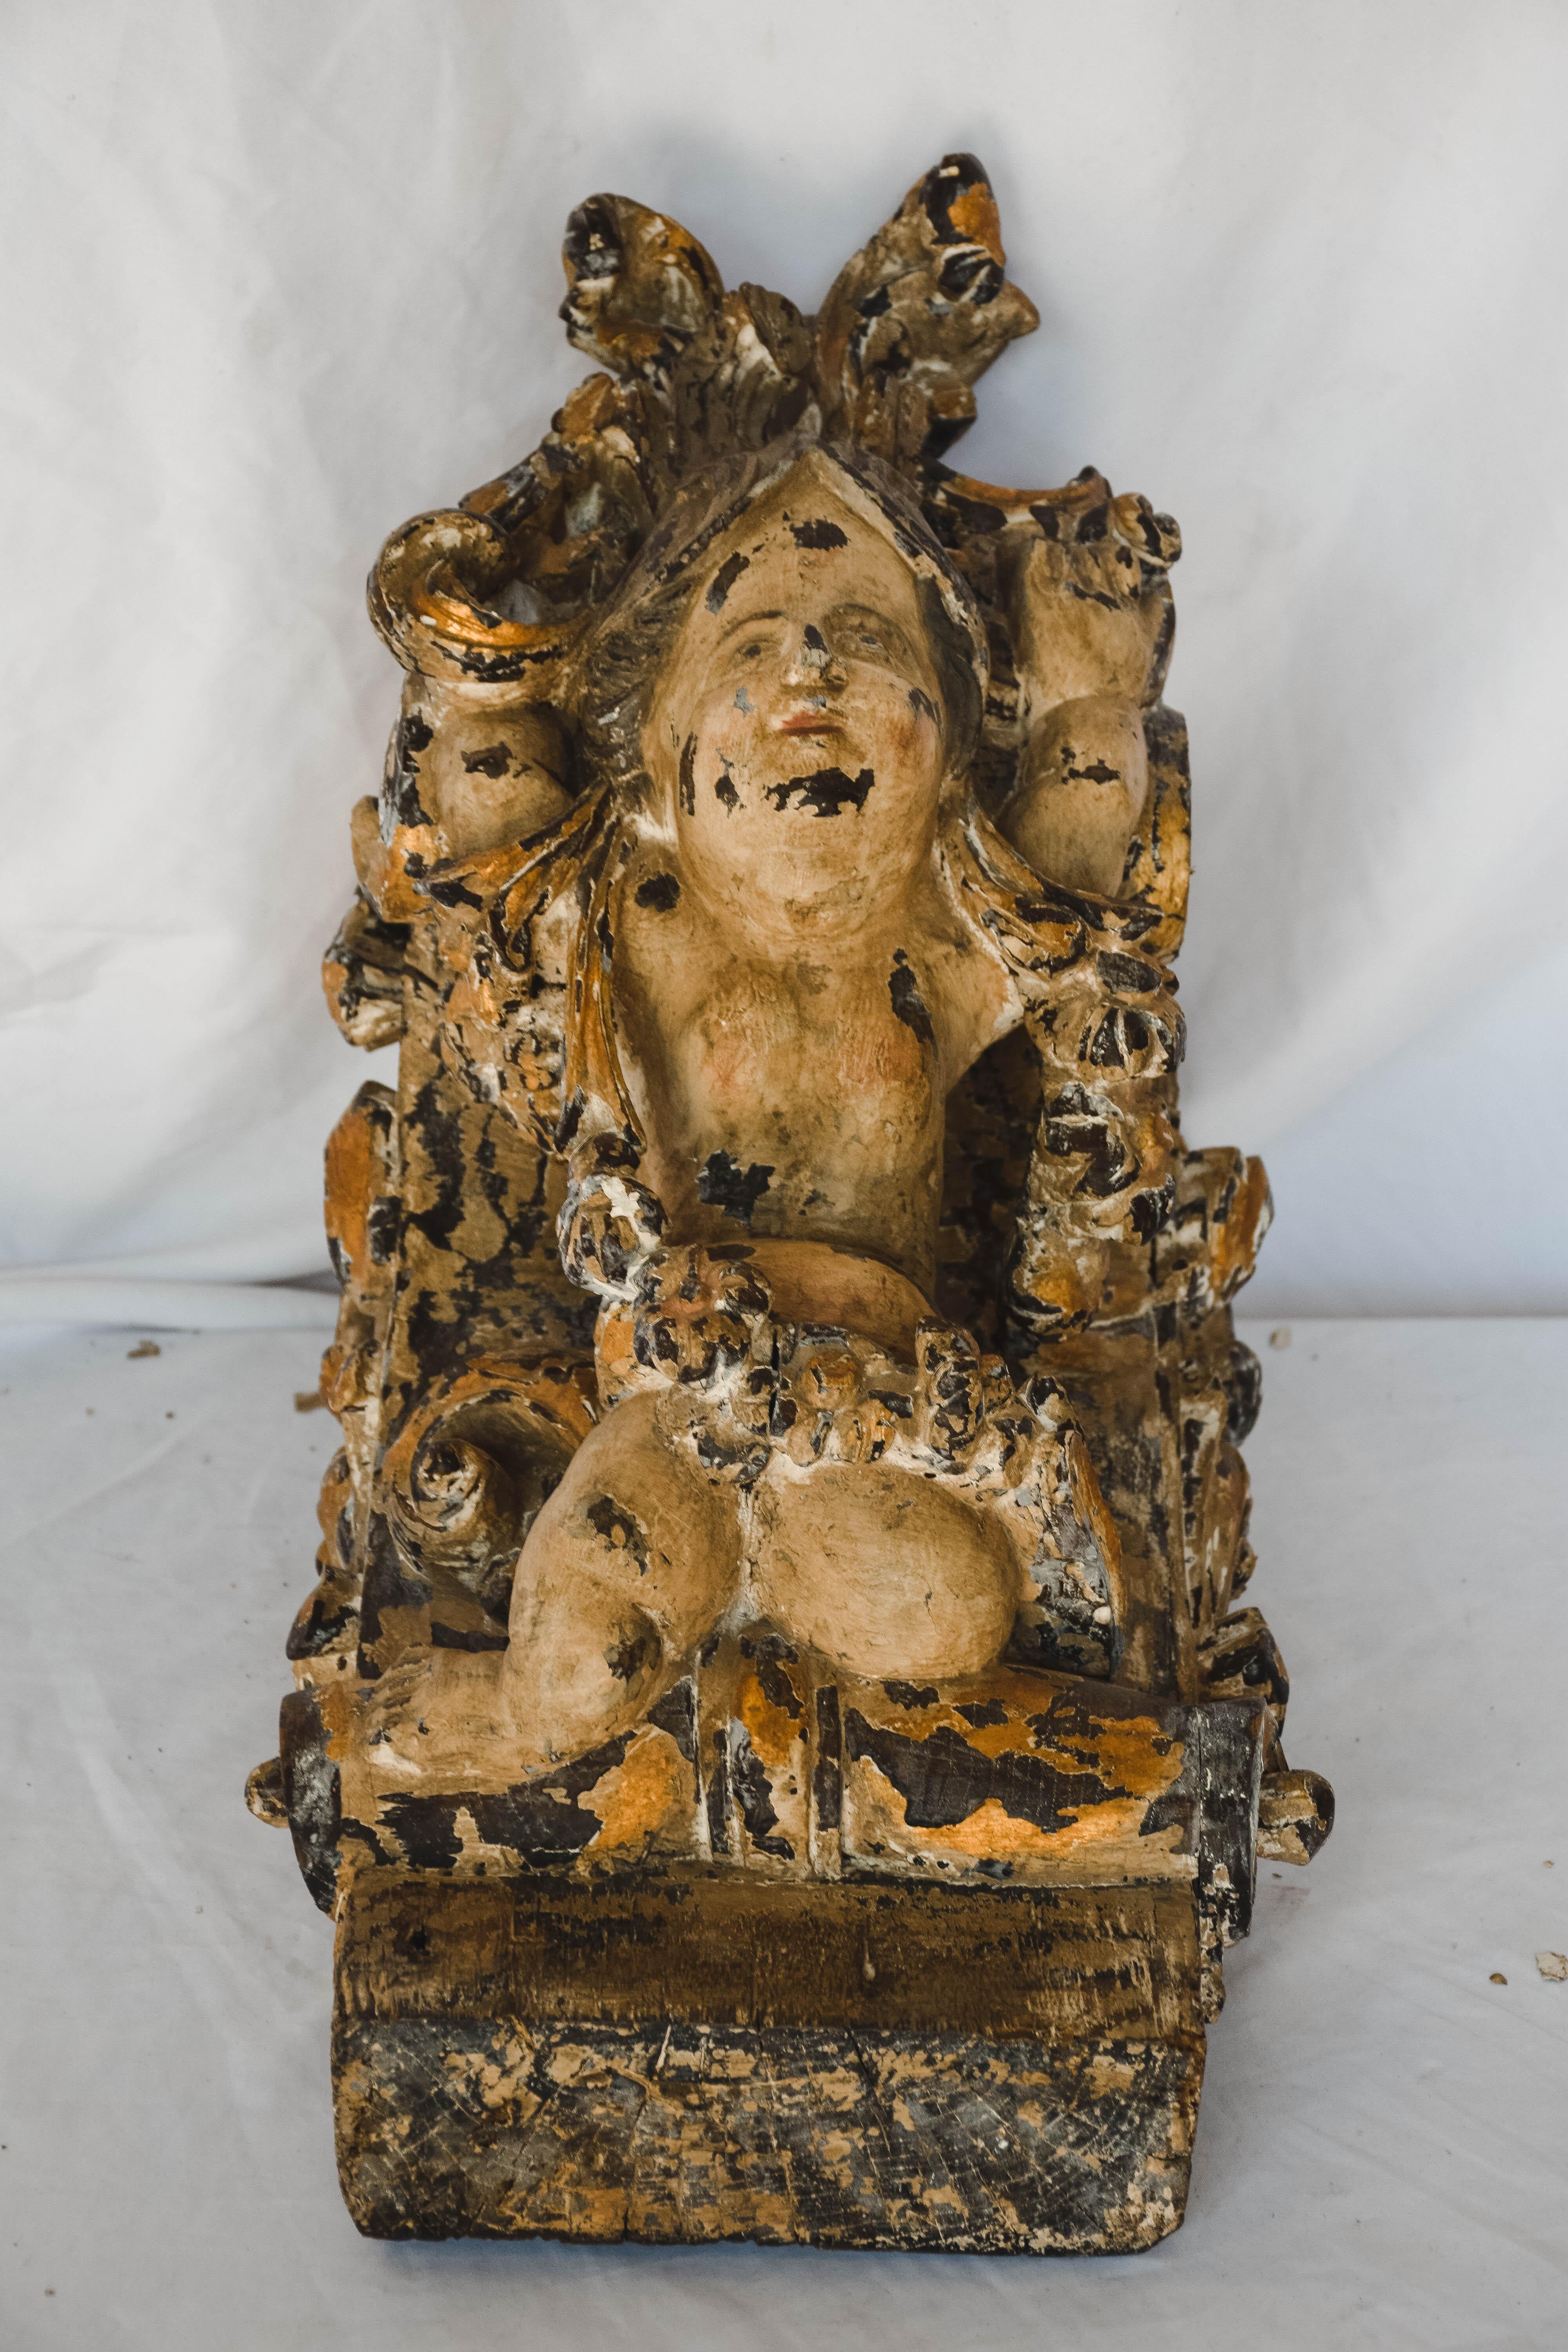 Wood carved and painted Putti from Portugal. Wood is intricately carved and the putti has a sweet smiling face that shows through with a natural patina of age. This piece could be used as a corbel, wall décor, or a shelf.